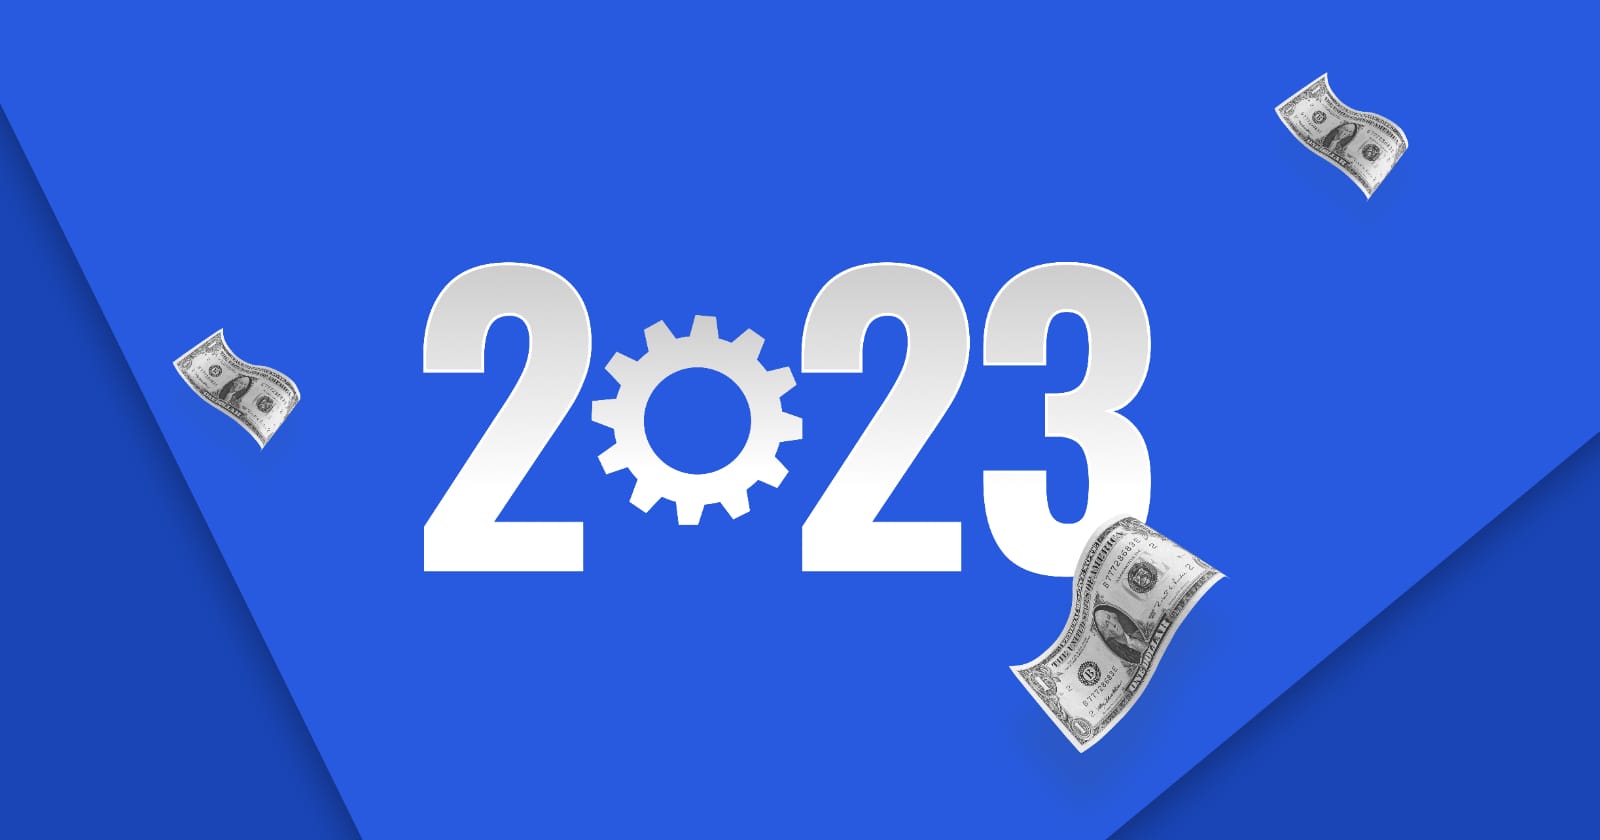 How Much Does it Cost to Hire a Developer or Programmer in 2023